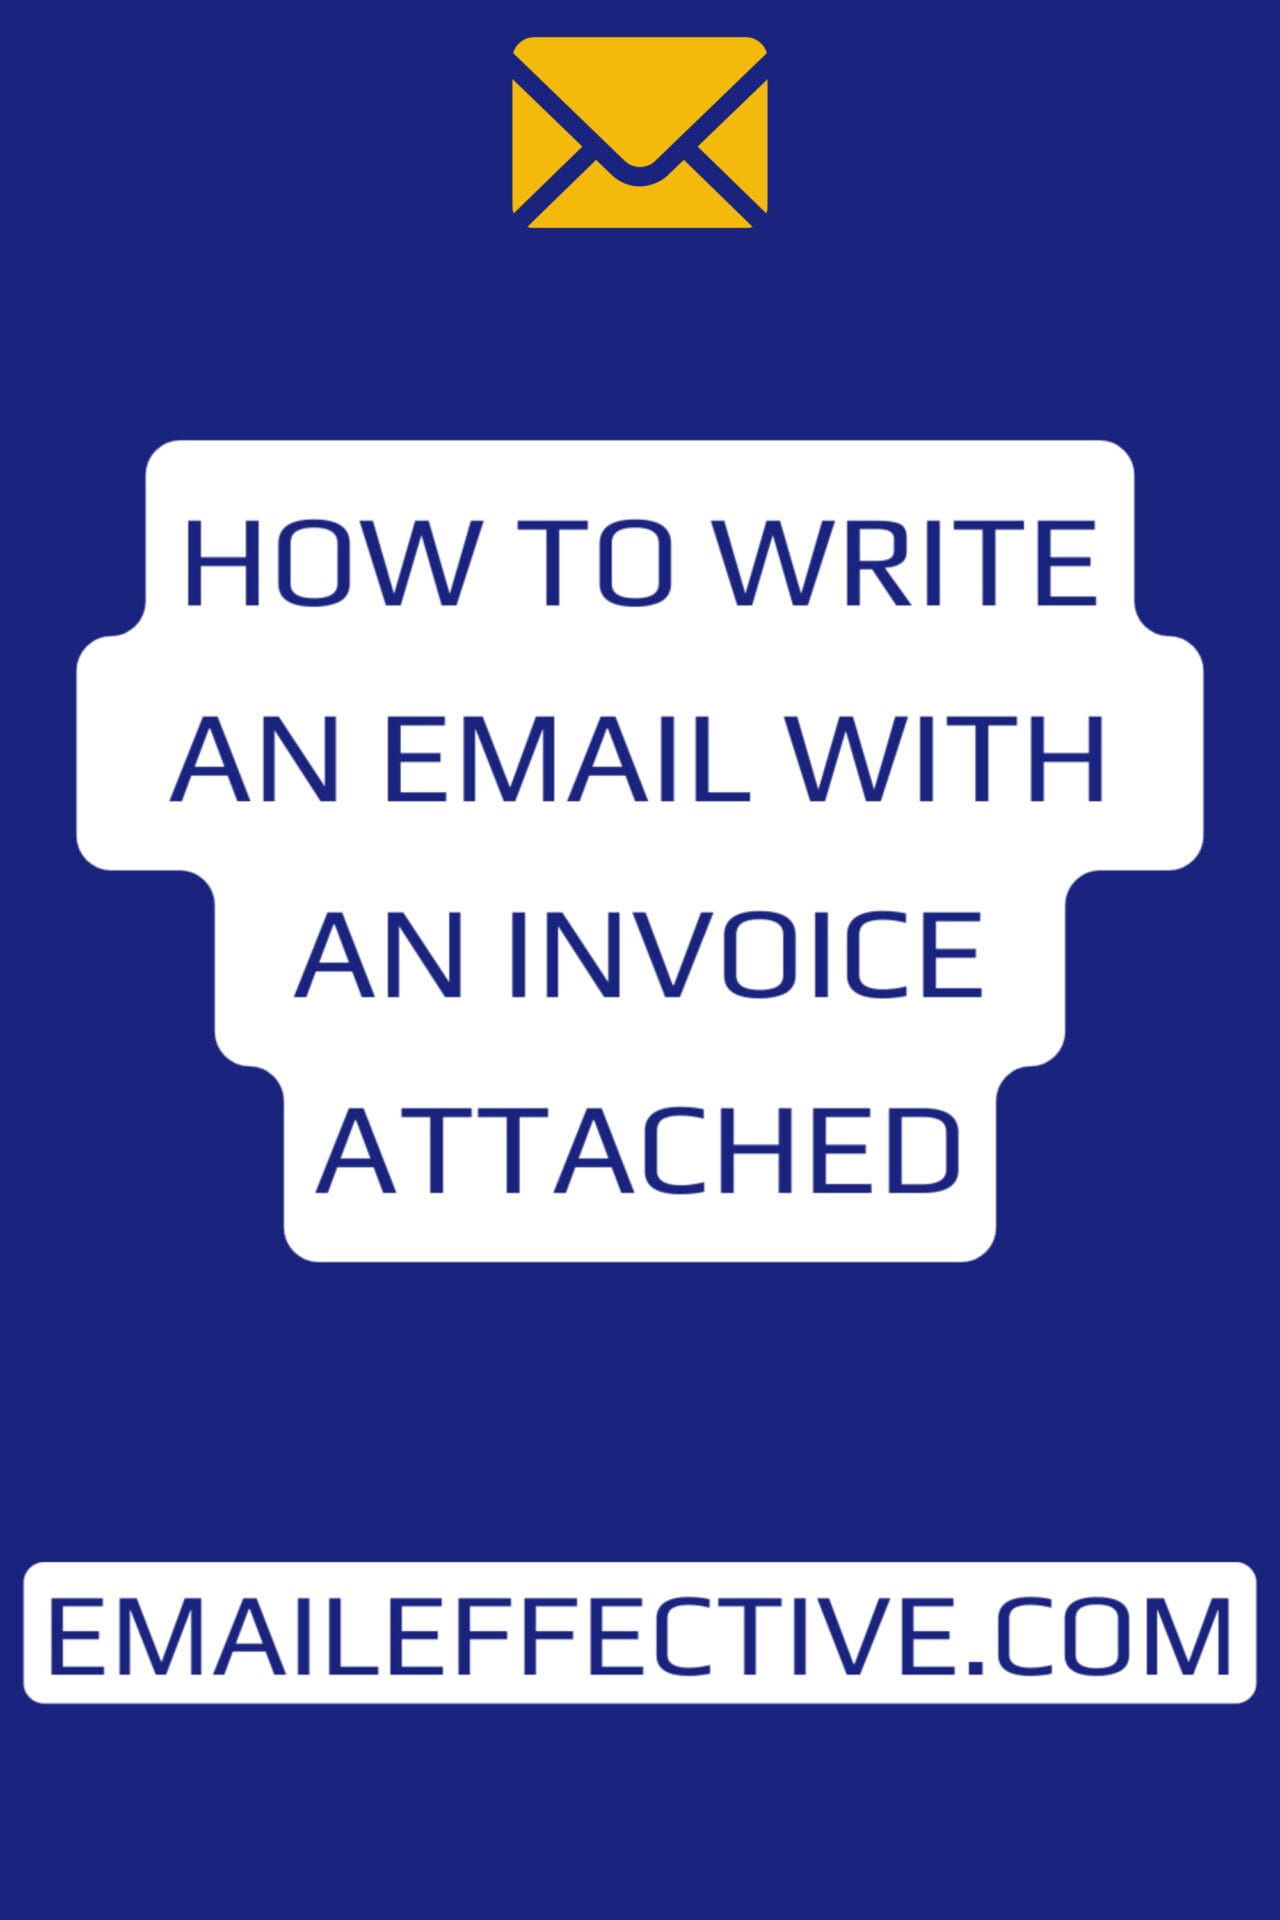 How to Write an Email with an Invoice Attached